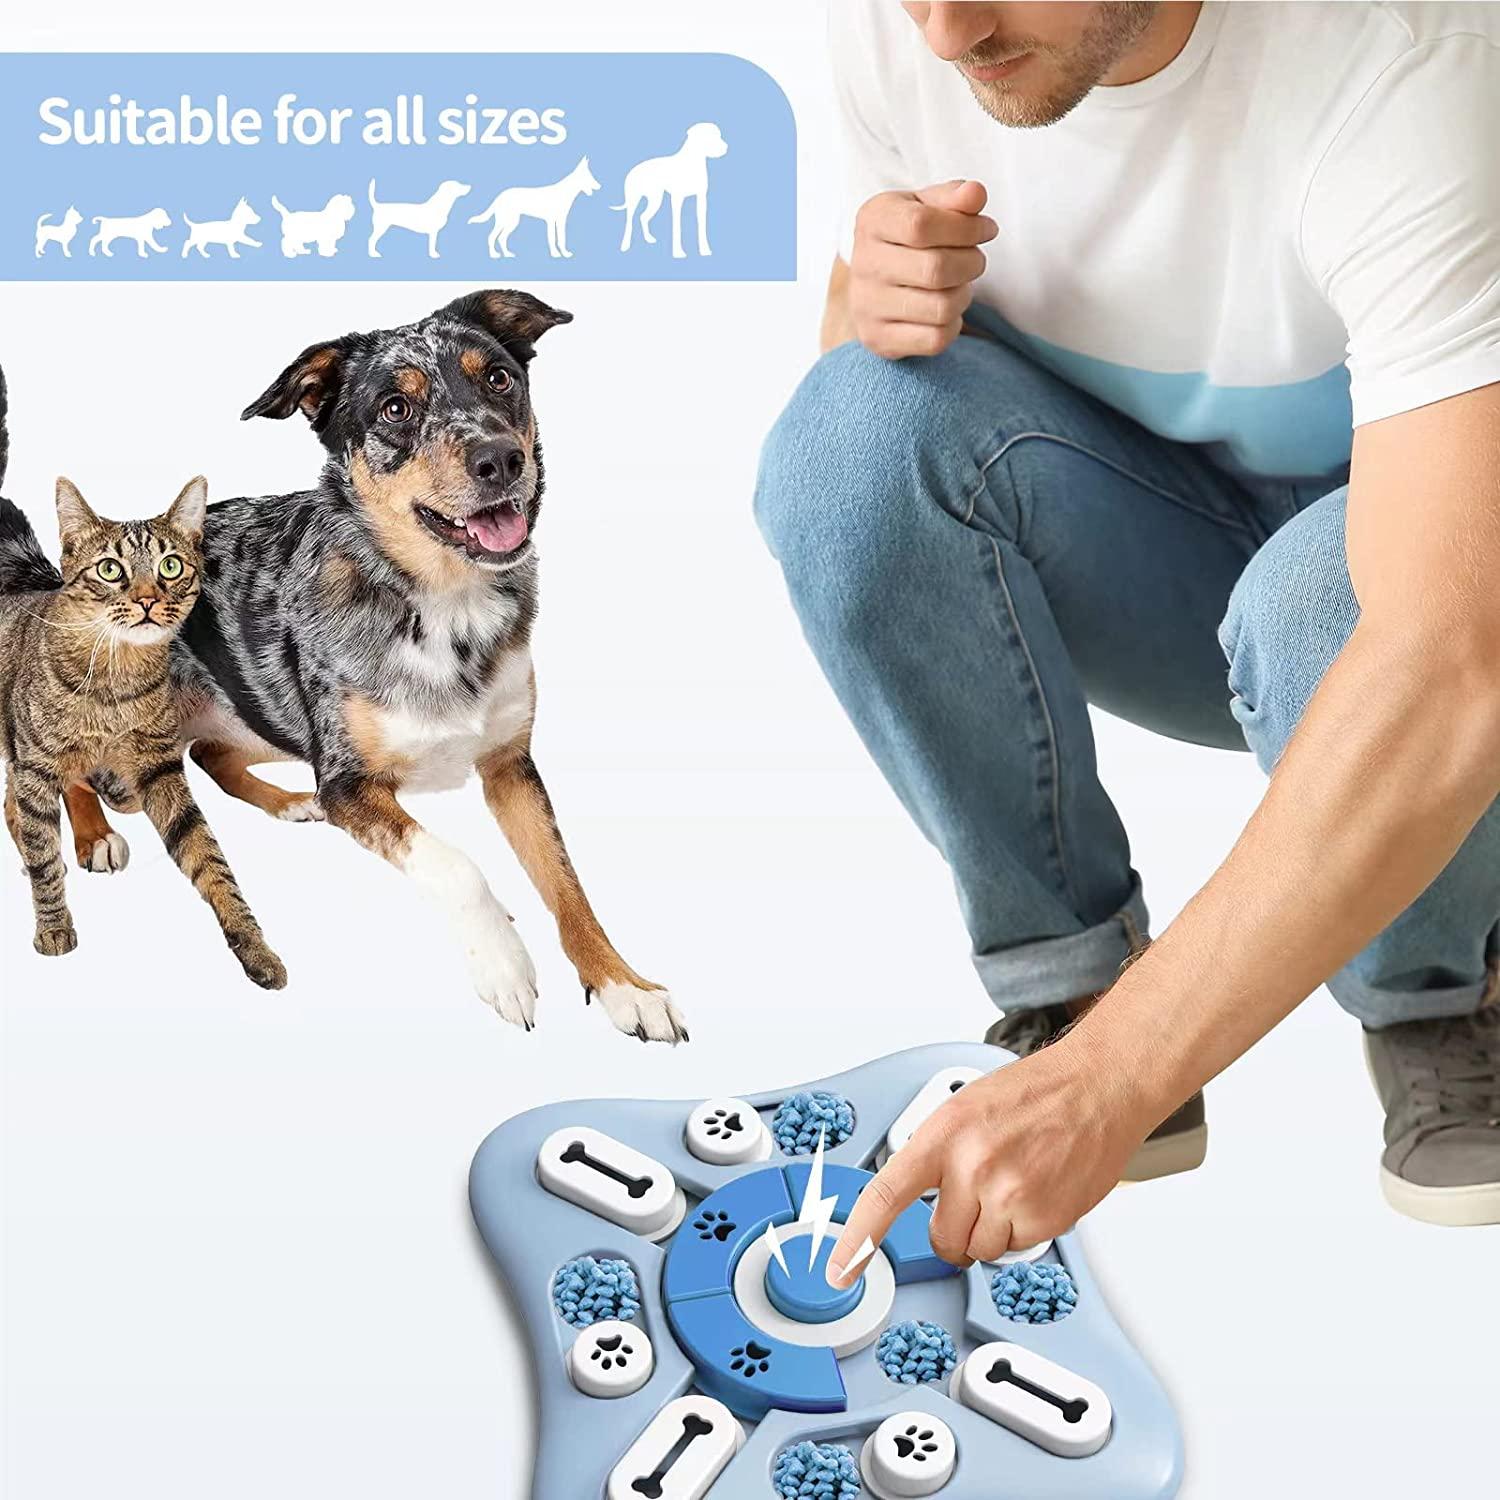 2022 New Edition Dog Puzzle Toys, Interactive Dog Toy for IQ